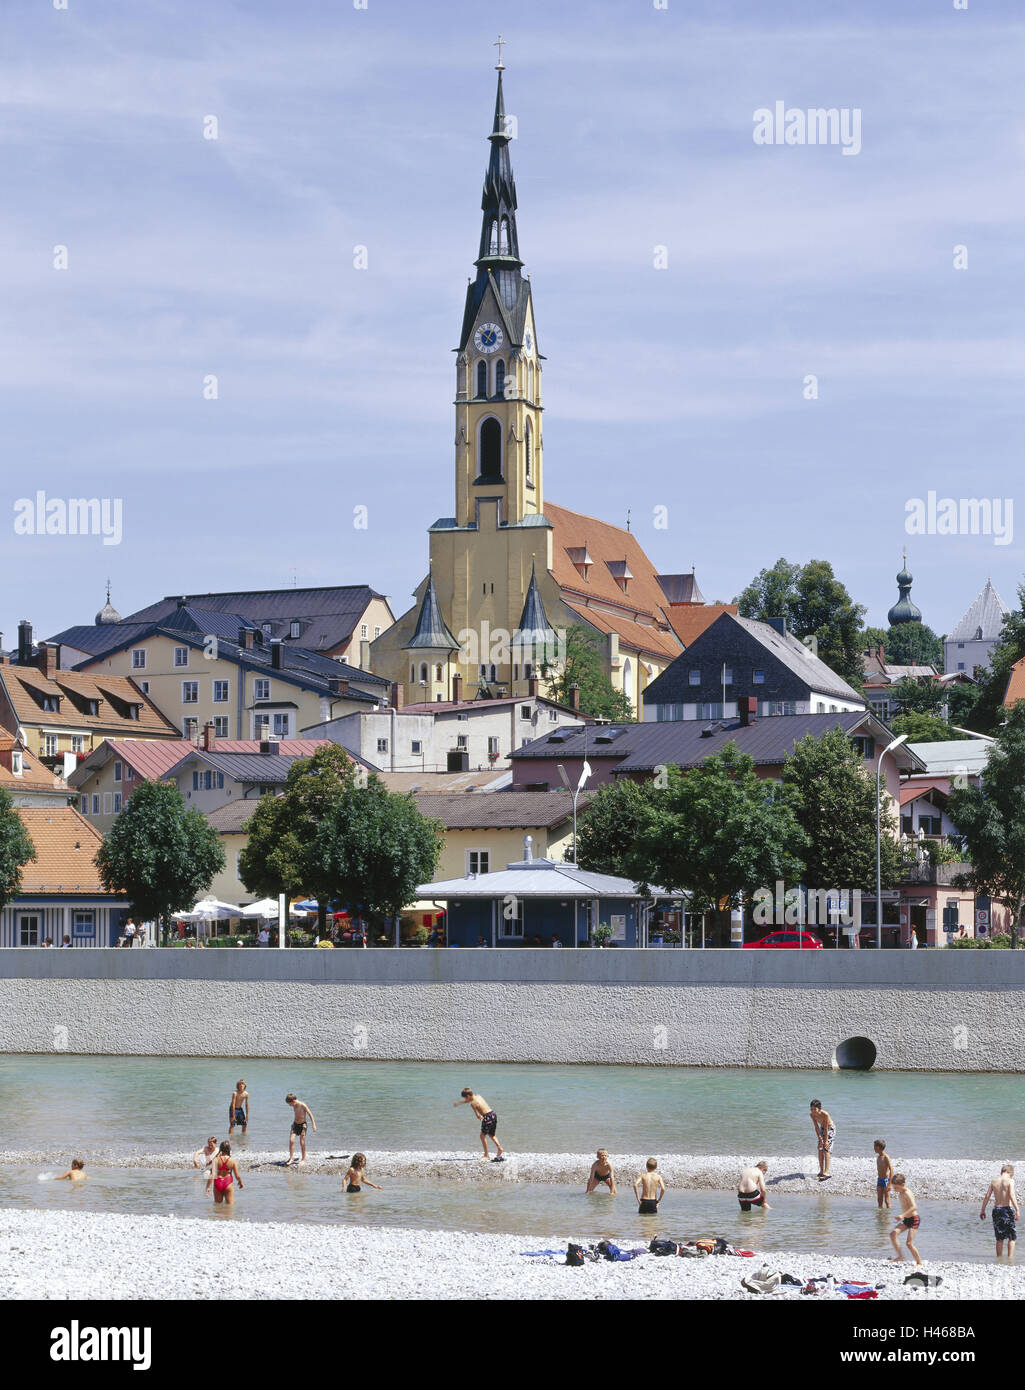 Germany, Bavaria, Bad Tölz (town), Cityscape, Isar, sandbanks, bathers, outside, Upper Bavaria, county seat, spa, healing climate, Altstadt, buildings, residential buildings, Church, Riverside, Riverbank, Leisure, swimming, summer, steeple, faith, Religio Stock Photo